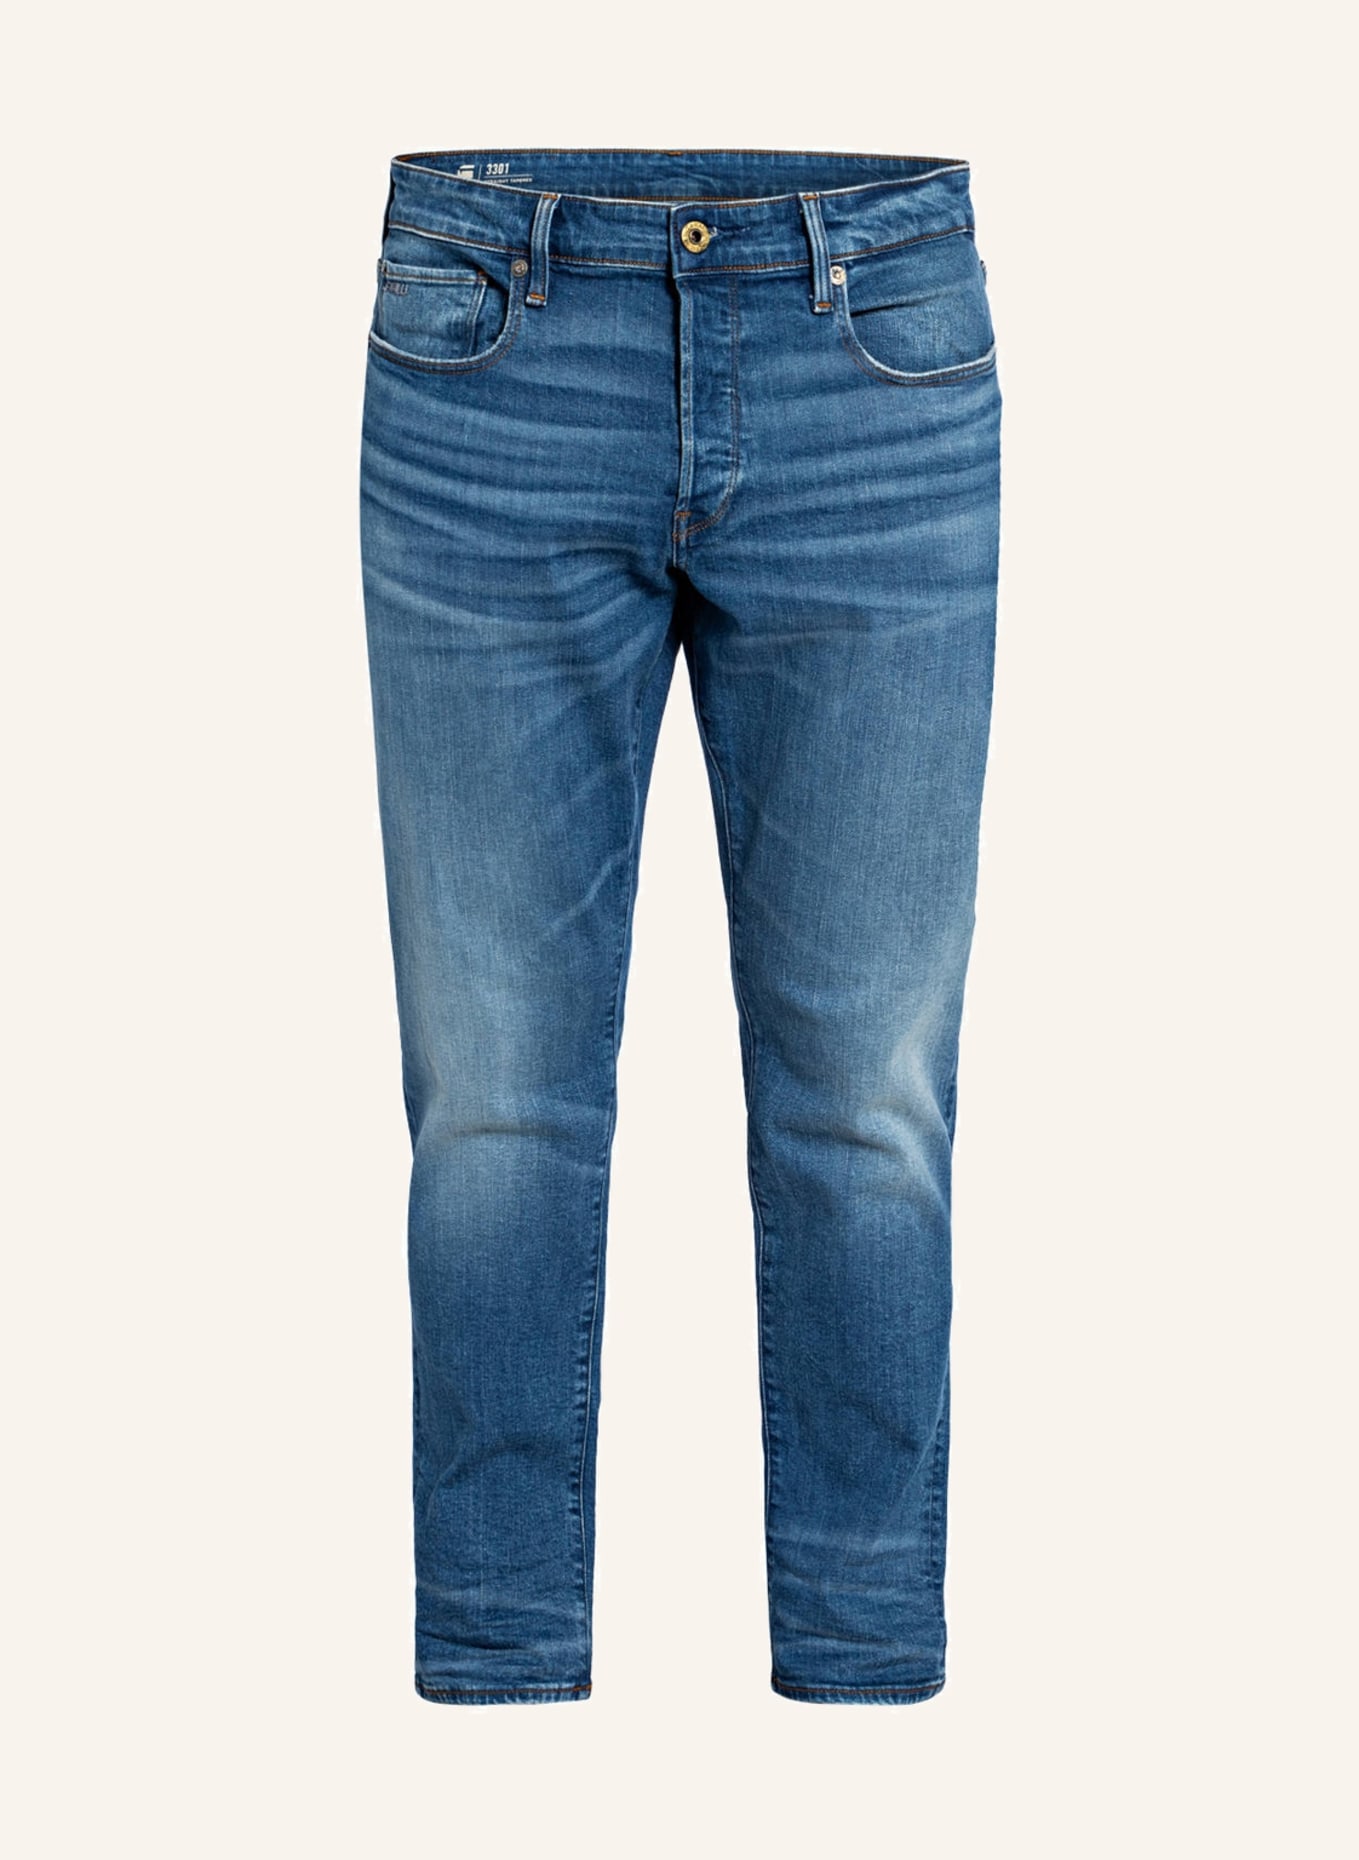 G-Star RAW Jeans 3301 straight tapered fit in a795 worn in azure blue